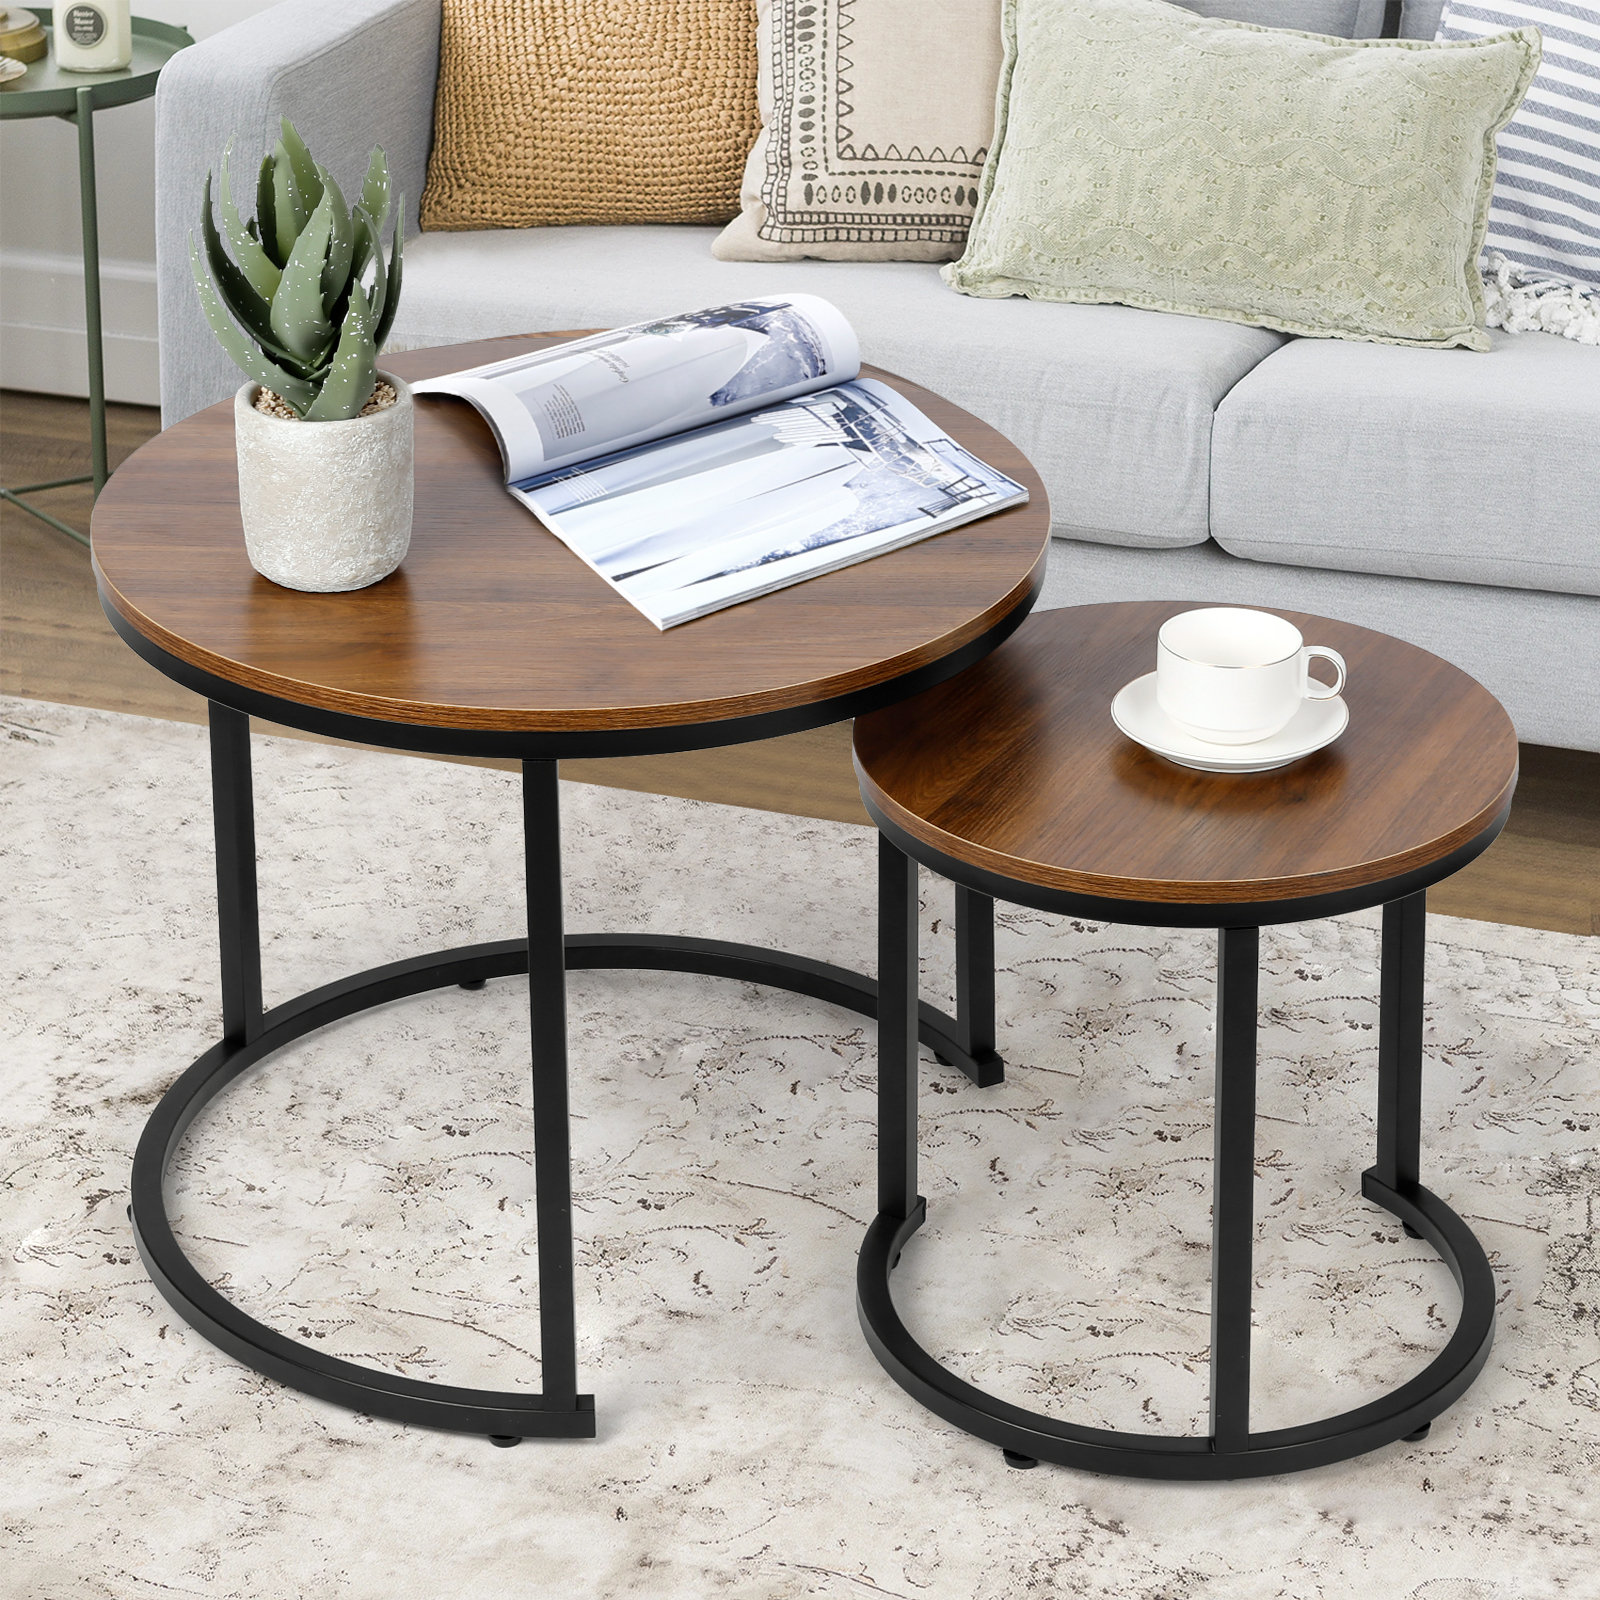 Petite Side Tables - Set of 2